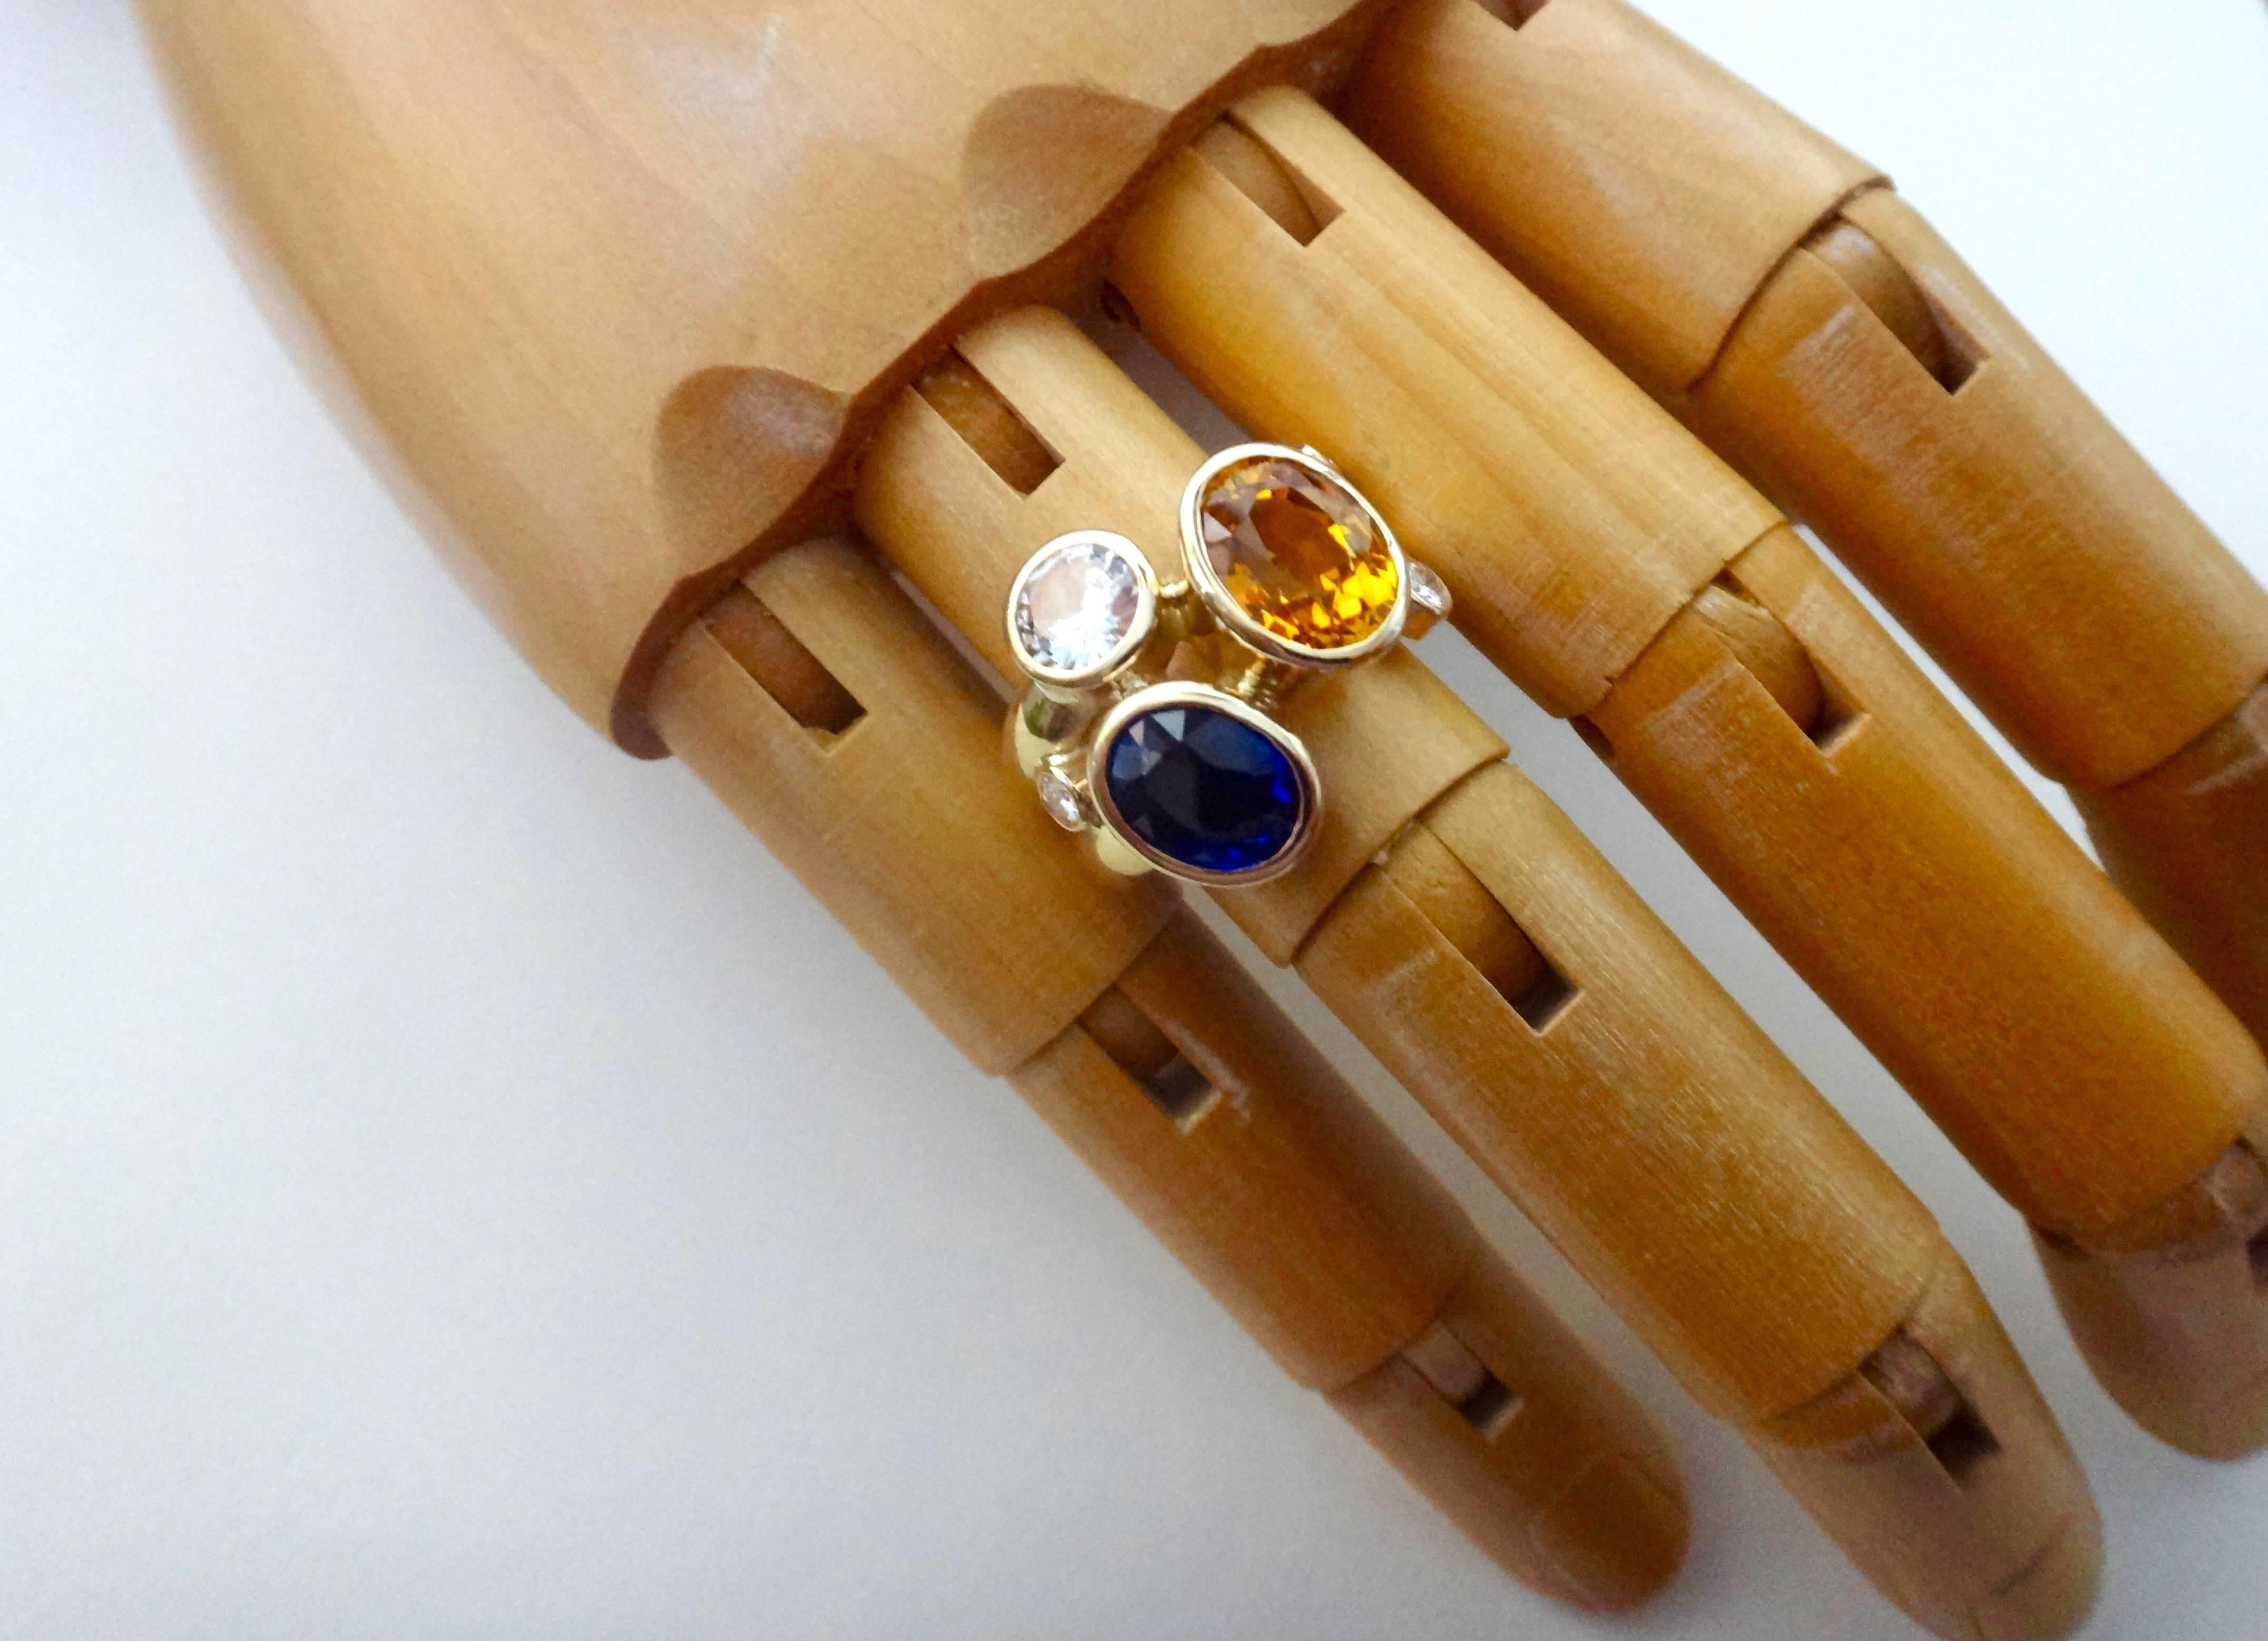 Oval cut and intense yellow and blue sapphires along with a brilliant cut silver sapphire are combined in this double 